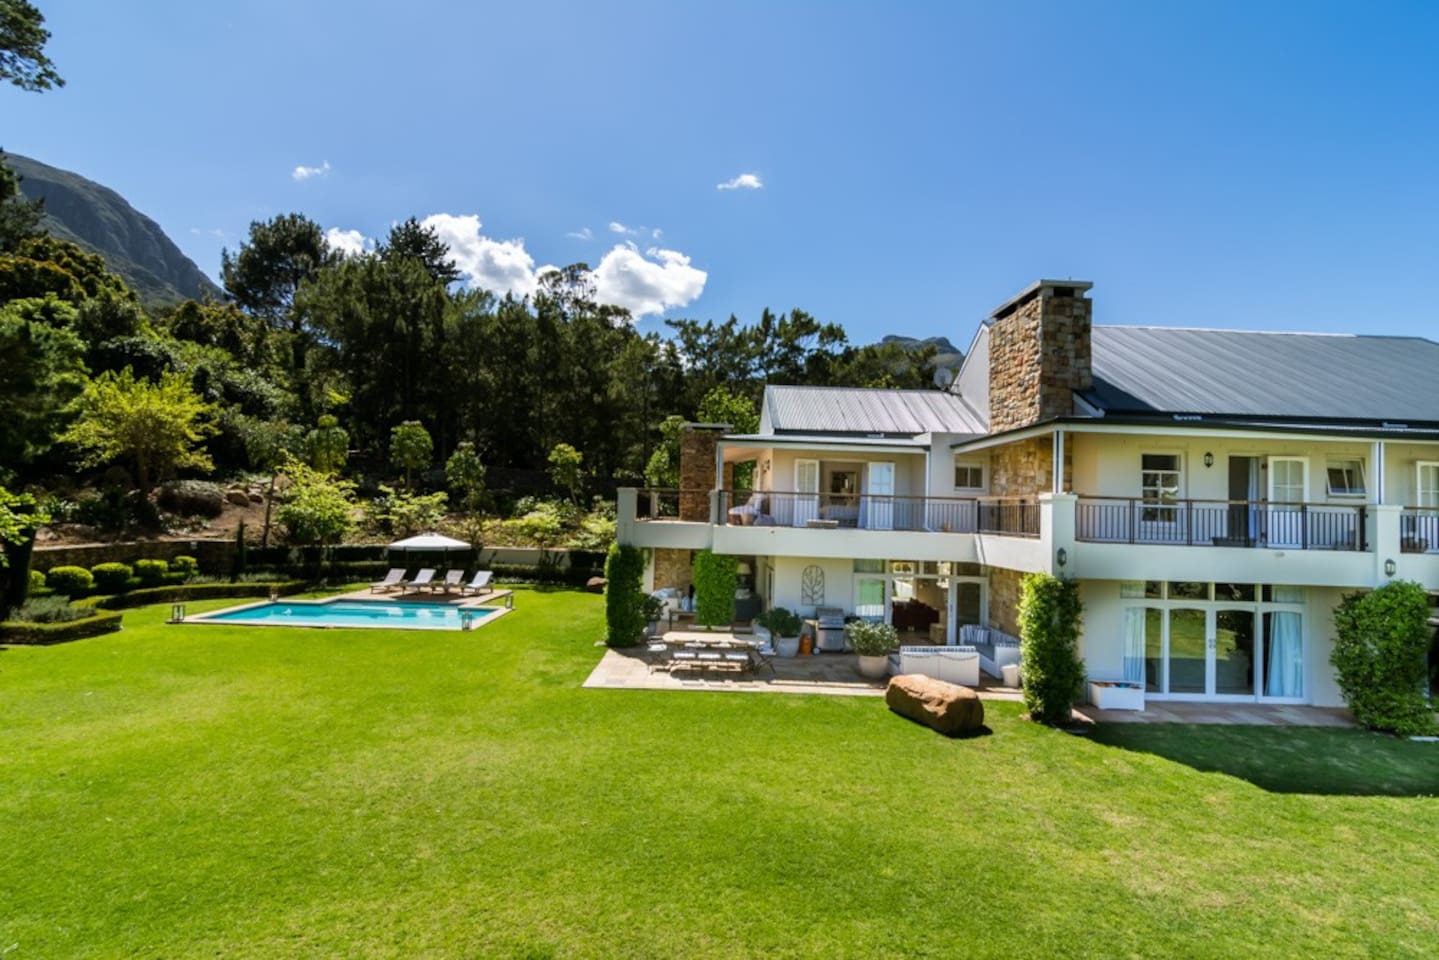 Photo 23 of Valley Retreat + Cottage accommodation in Hout Bay, Cape Town with 7 bedrooms and 6 bathrooms